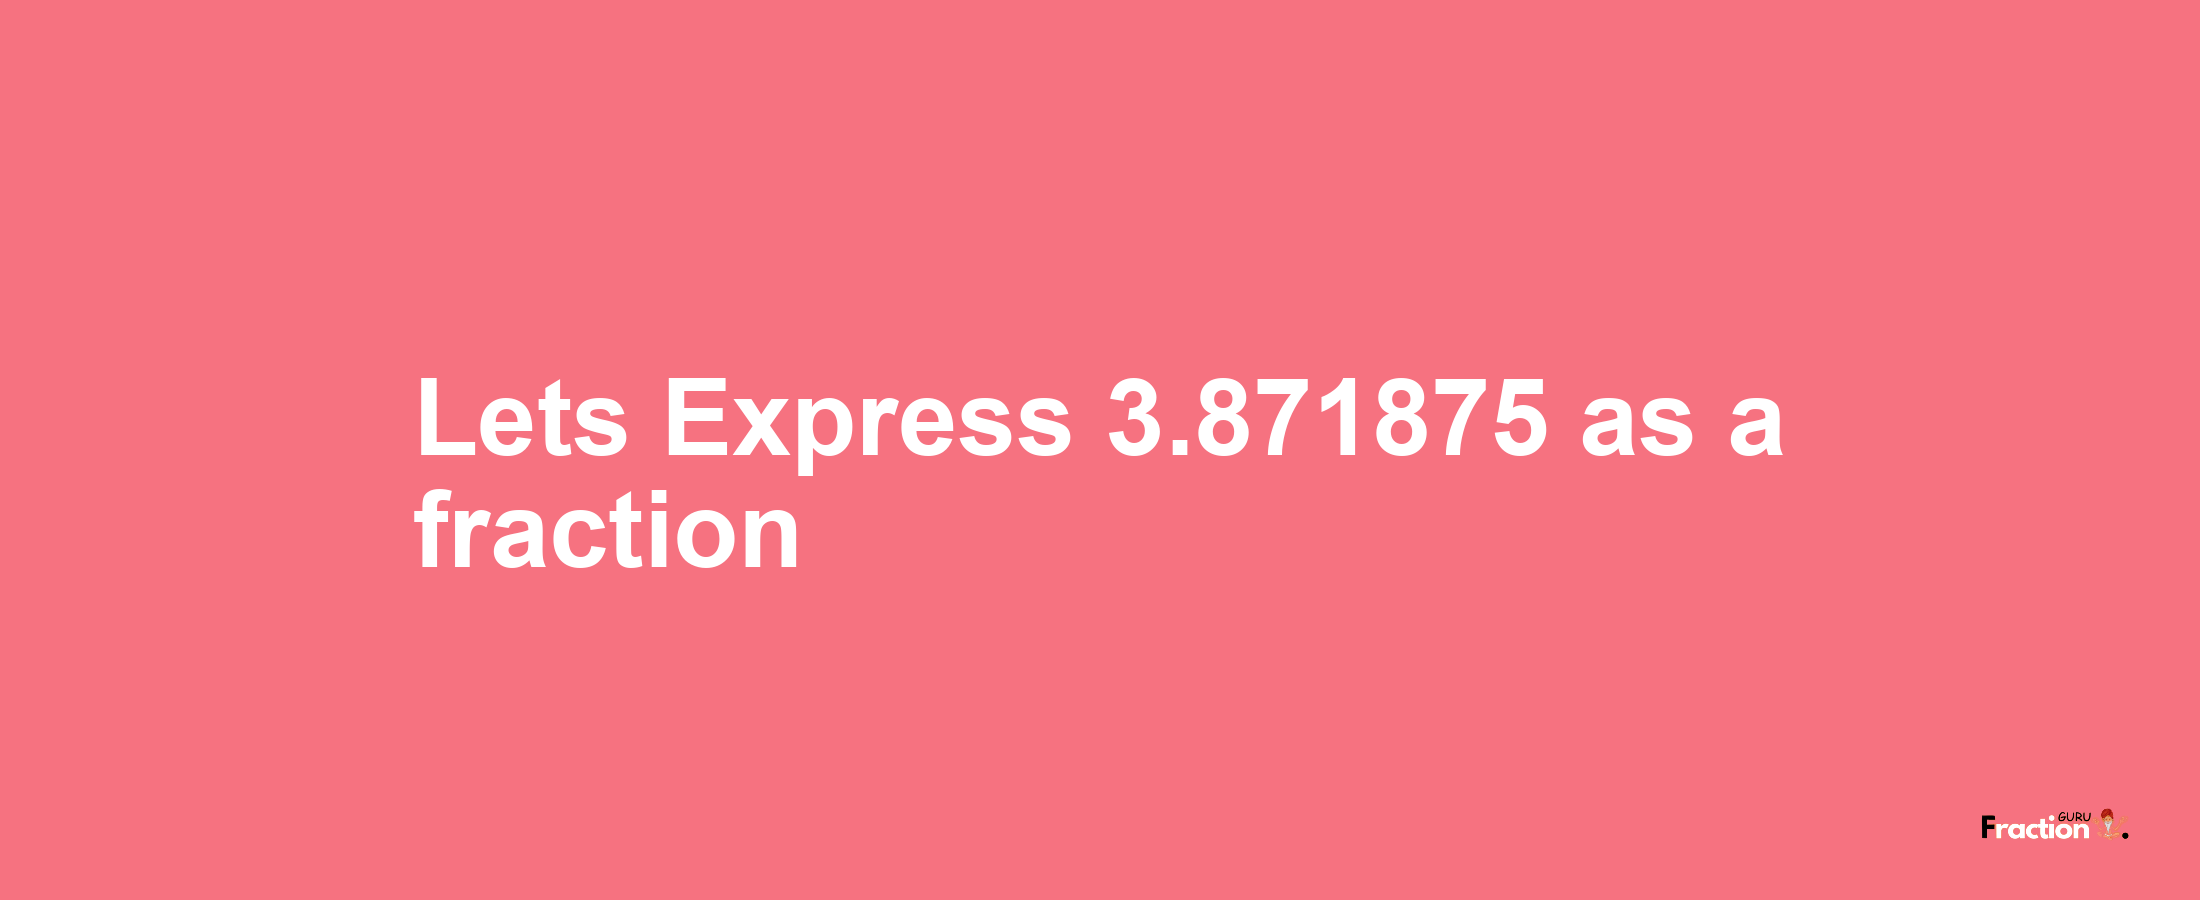 Lets Express 3.871875 as afraction